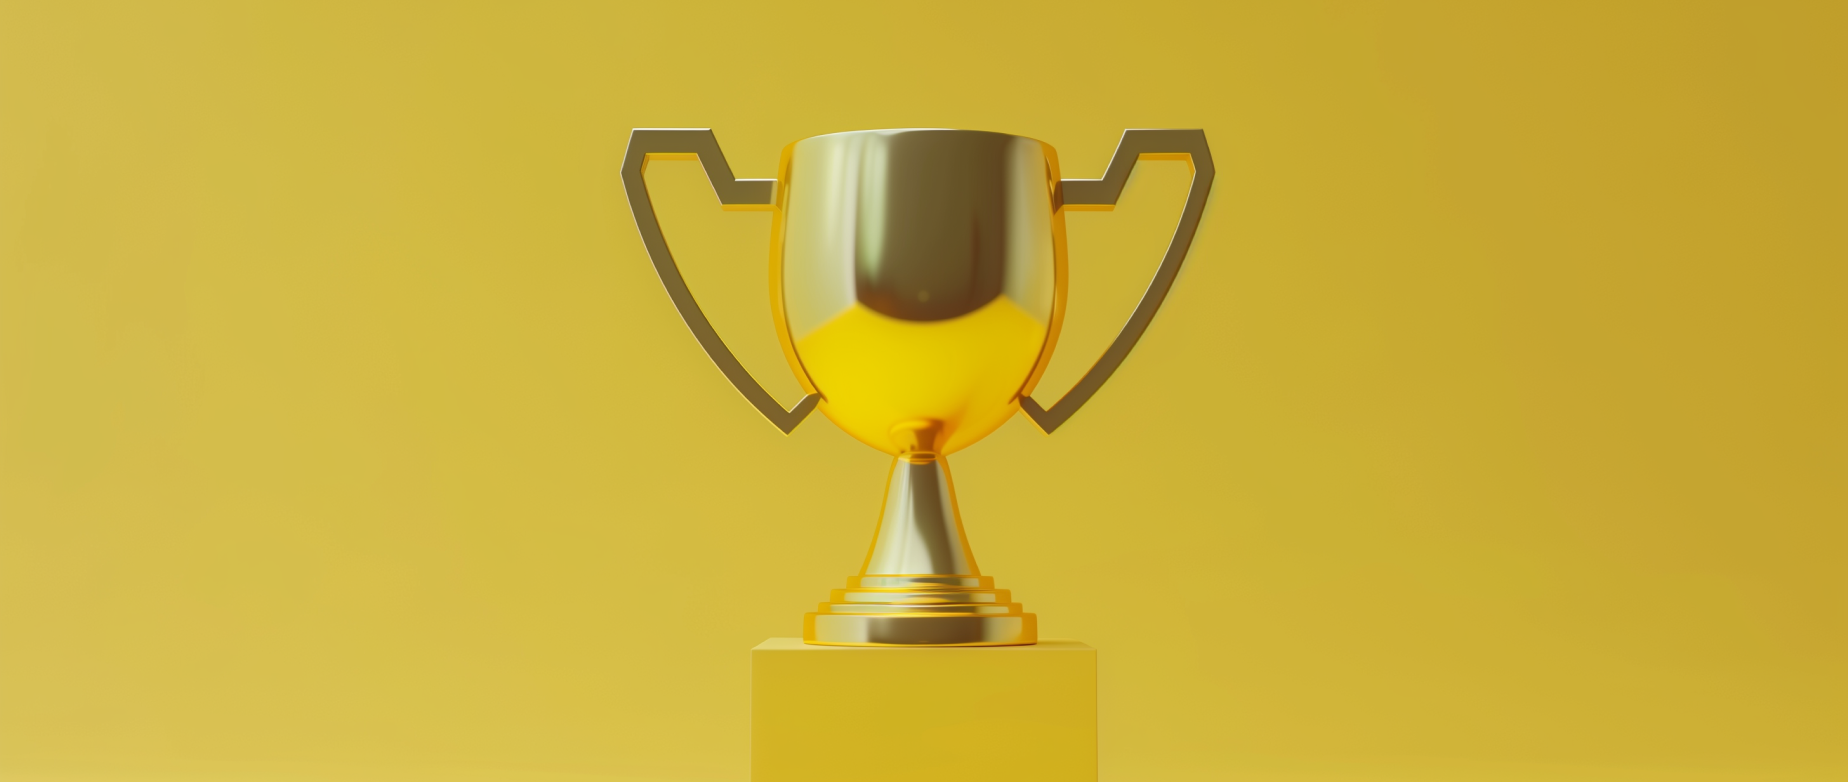 A gold trophy on a yellow background.